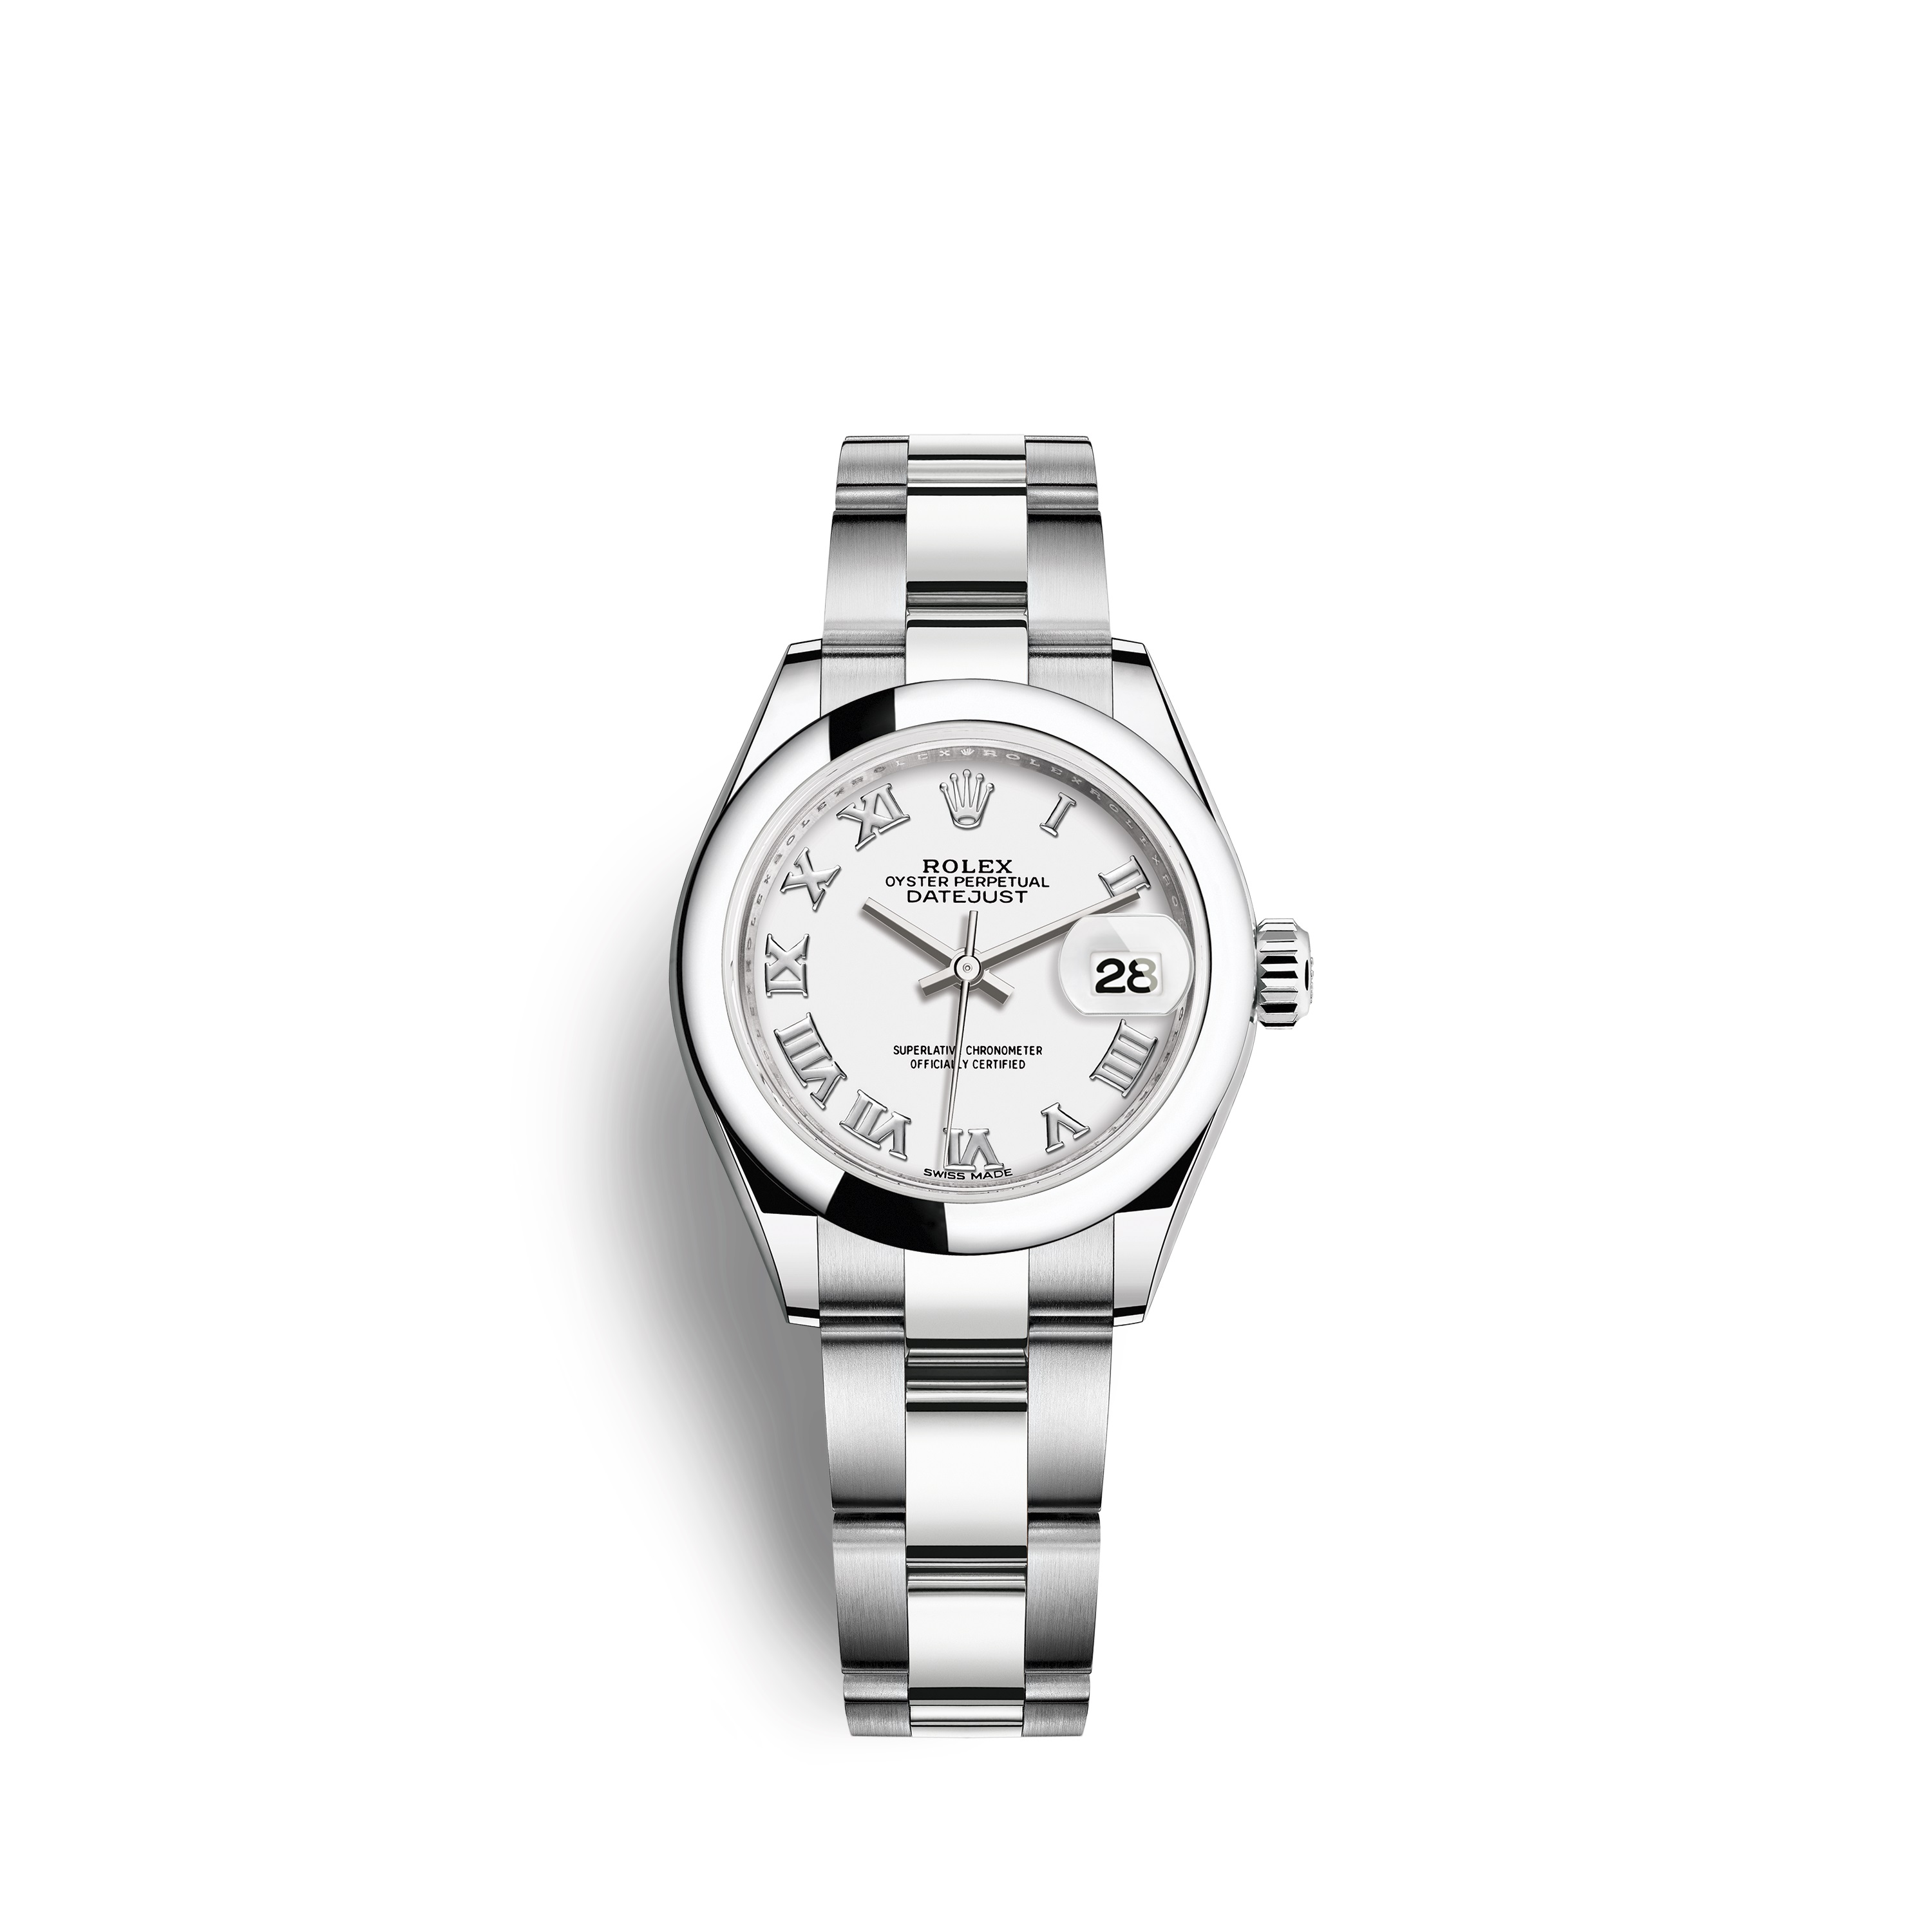 Lady-Datejust 28 279160 Stainless Steel Watch (White)